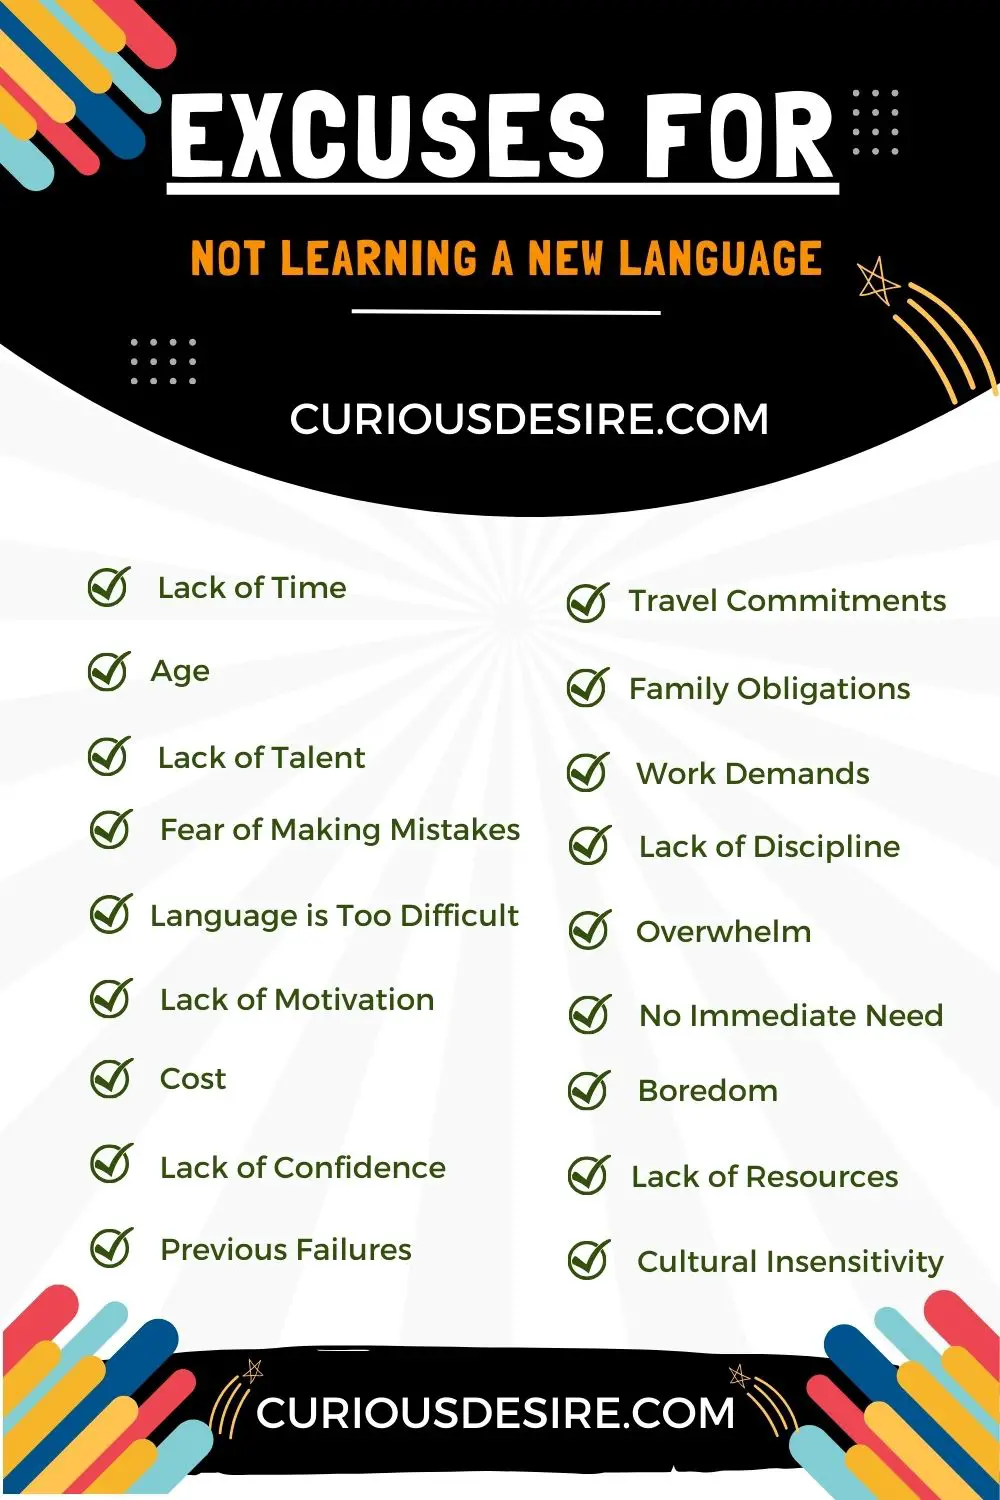 Top 30 Excuses for not Learning a new Language